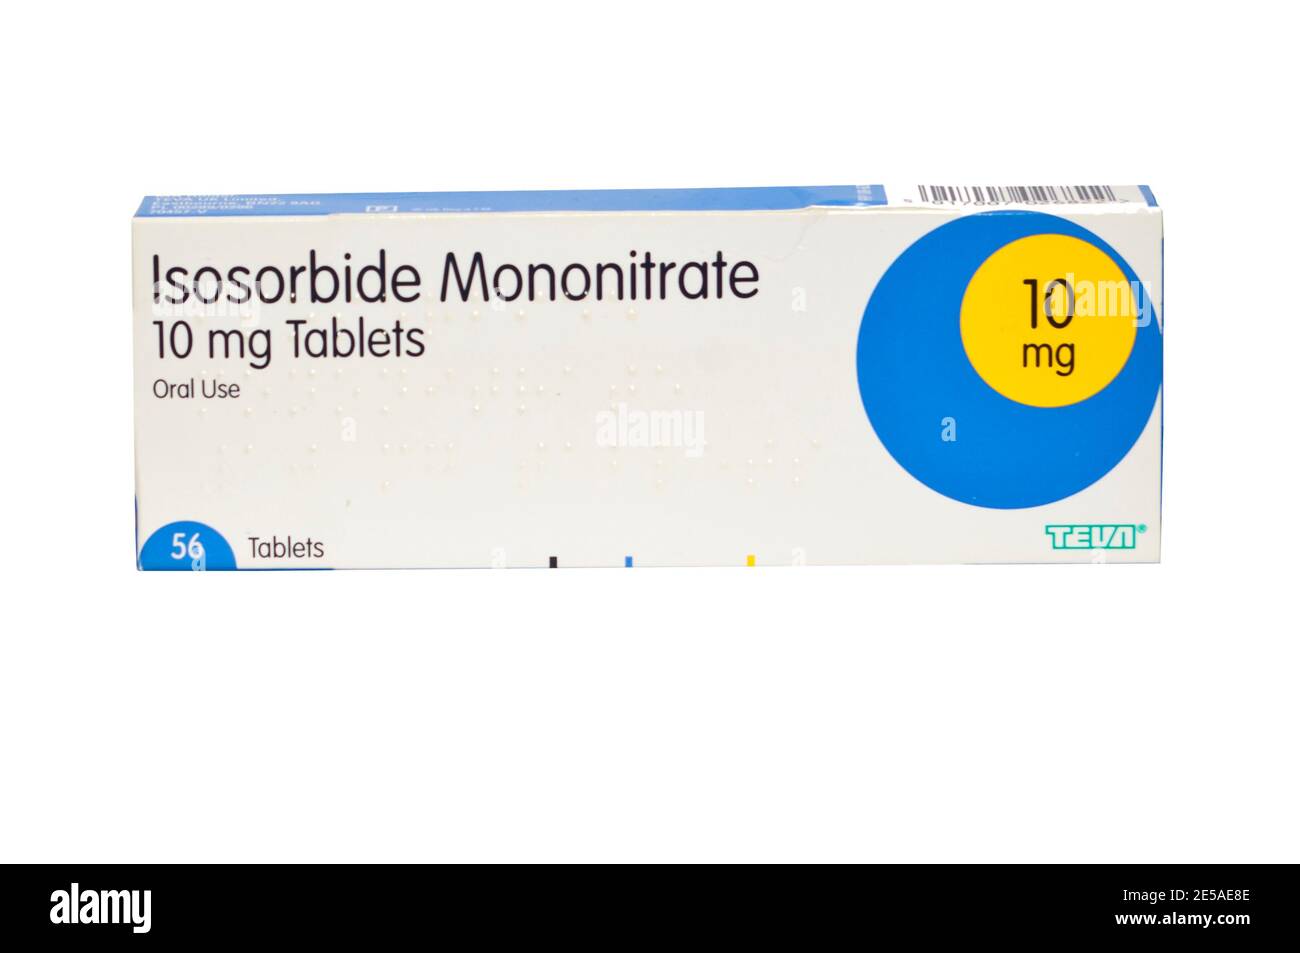 Pack Packet Box Of Isosorbide Mononitrate 10mg Tablets Stock Photo